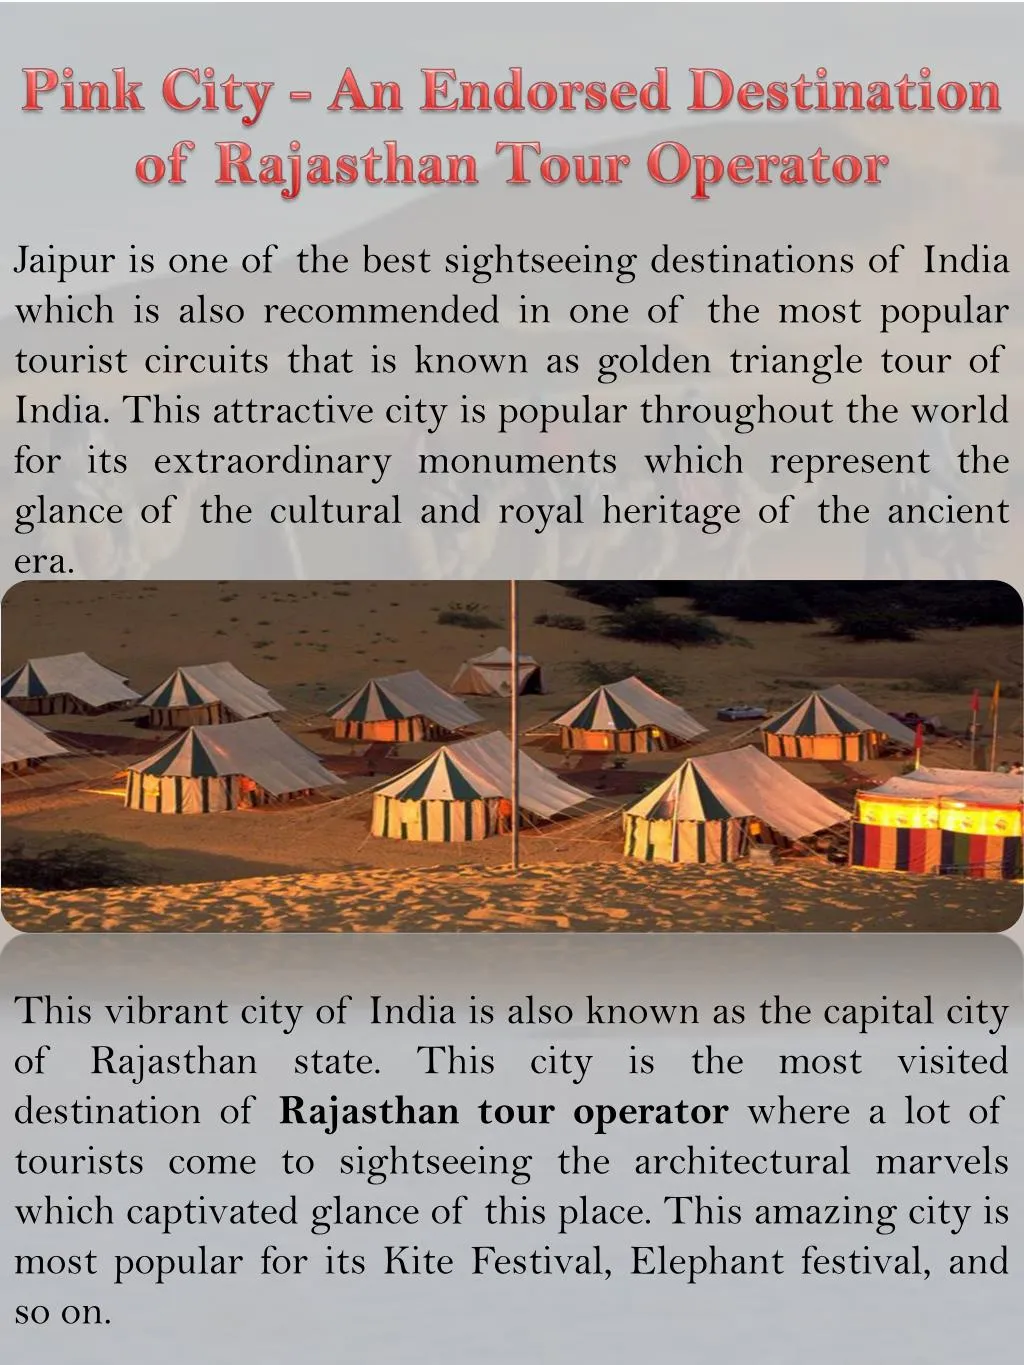 jaipur is one of the best sightseeing